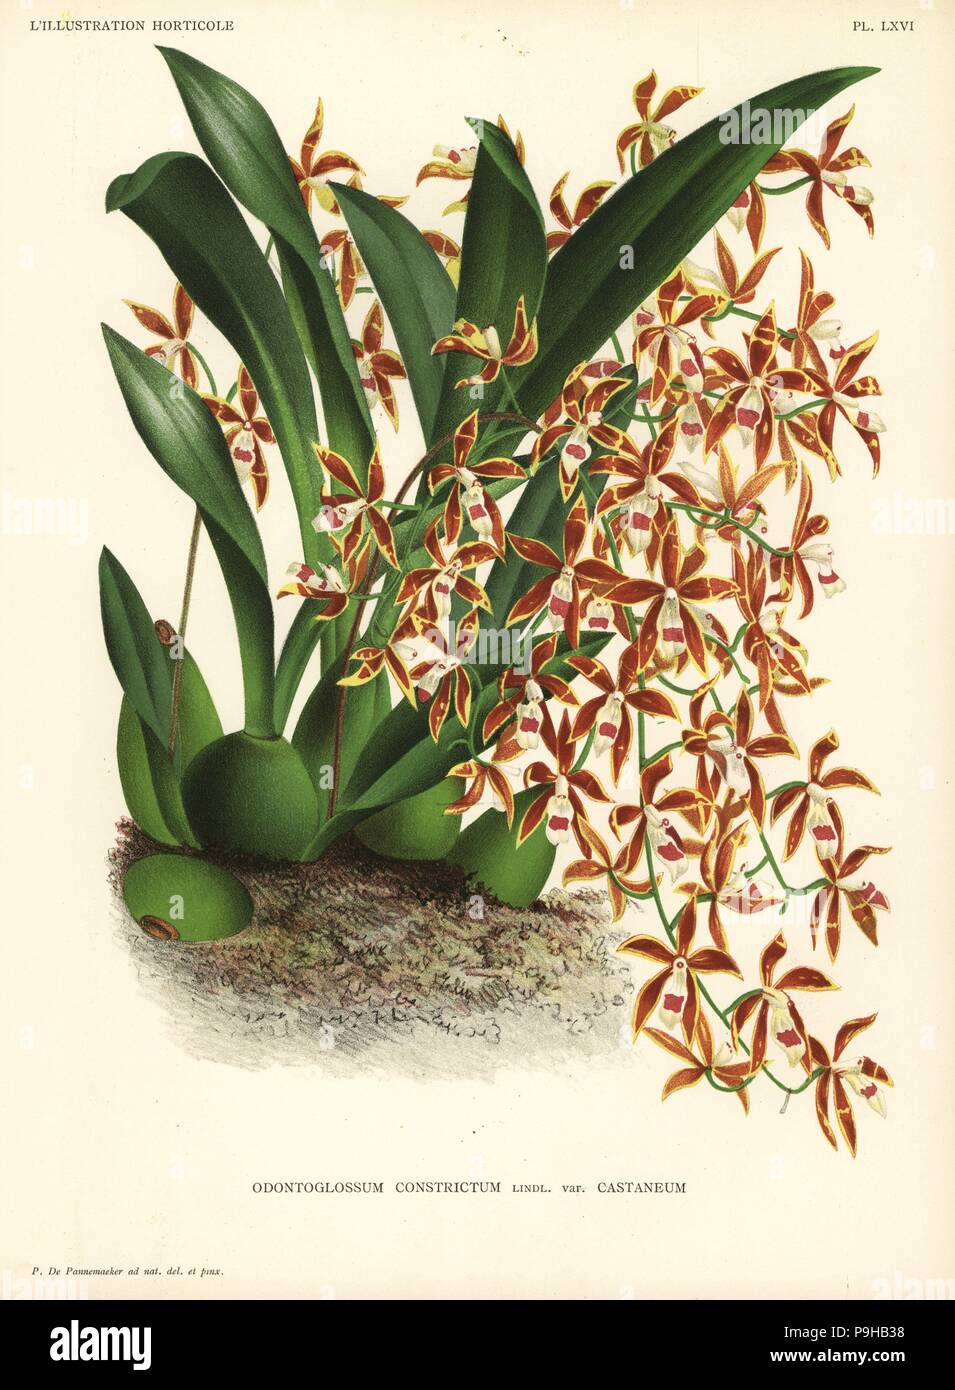 Oncidium constrictum orchid (Odontoglossum constrictum var. castaneum). Drawn and chromolithographed by Pieter de Pannemaeker from Jean Linden's l'Illustration Horticole, Brussels, 1888. Stock Photo